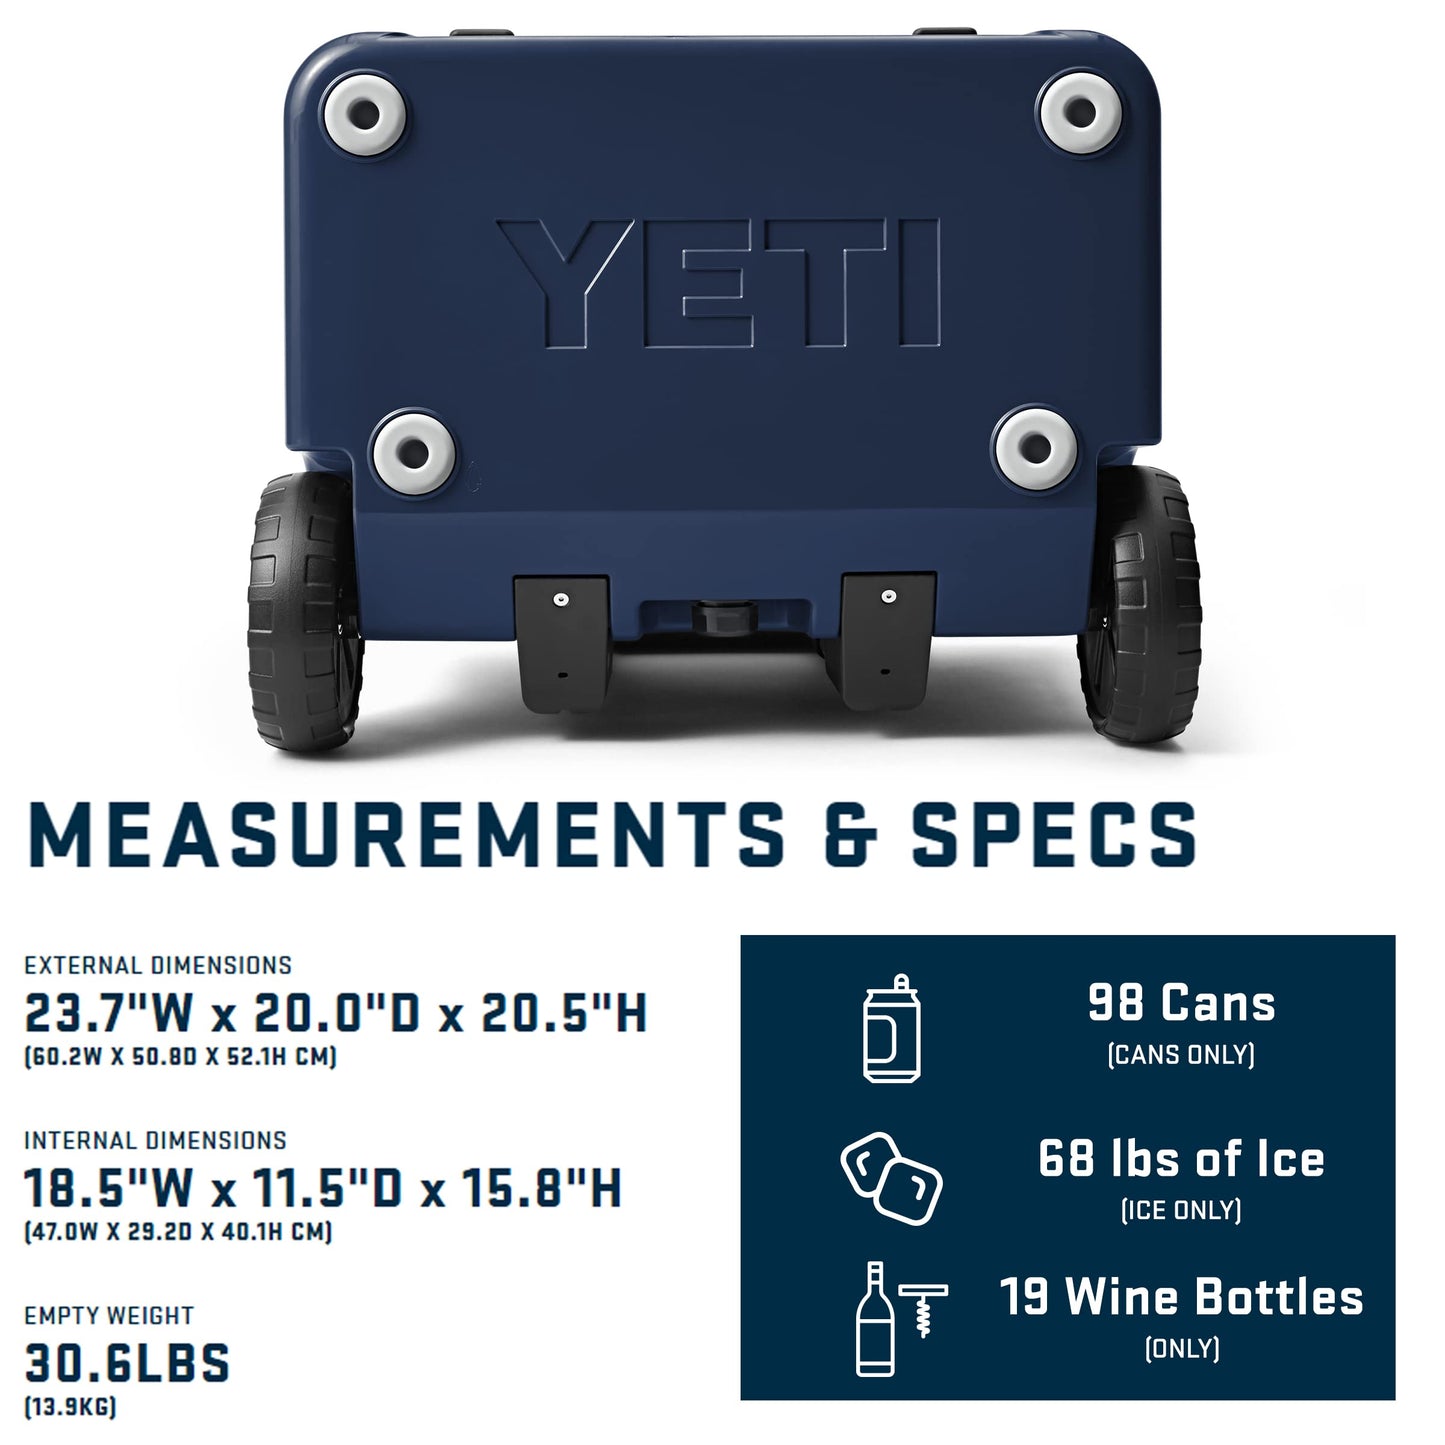 YETI Roadie 60 Wheeled Cooler with Retractable Periscope Handle, Navy